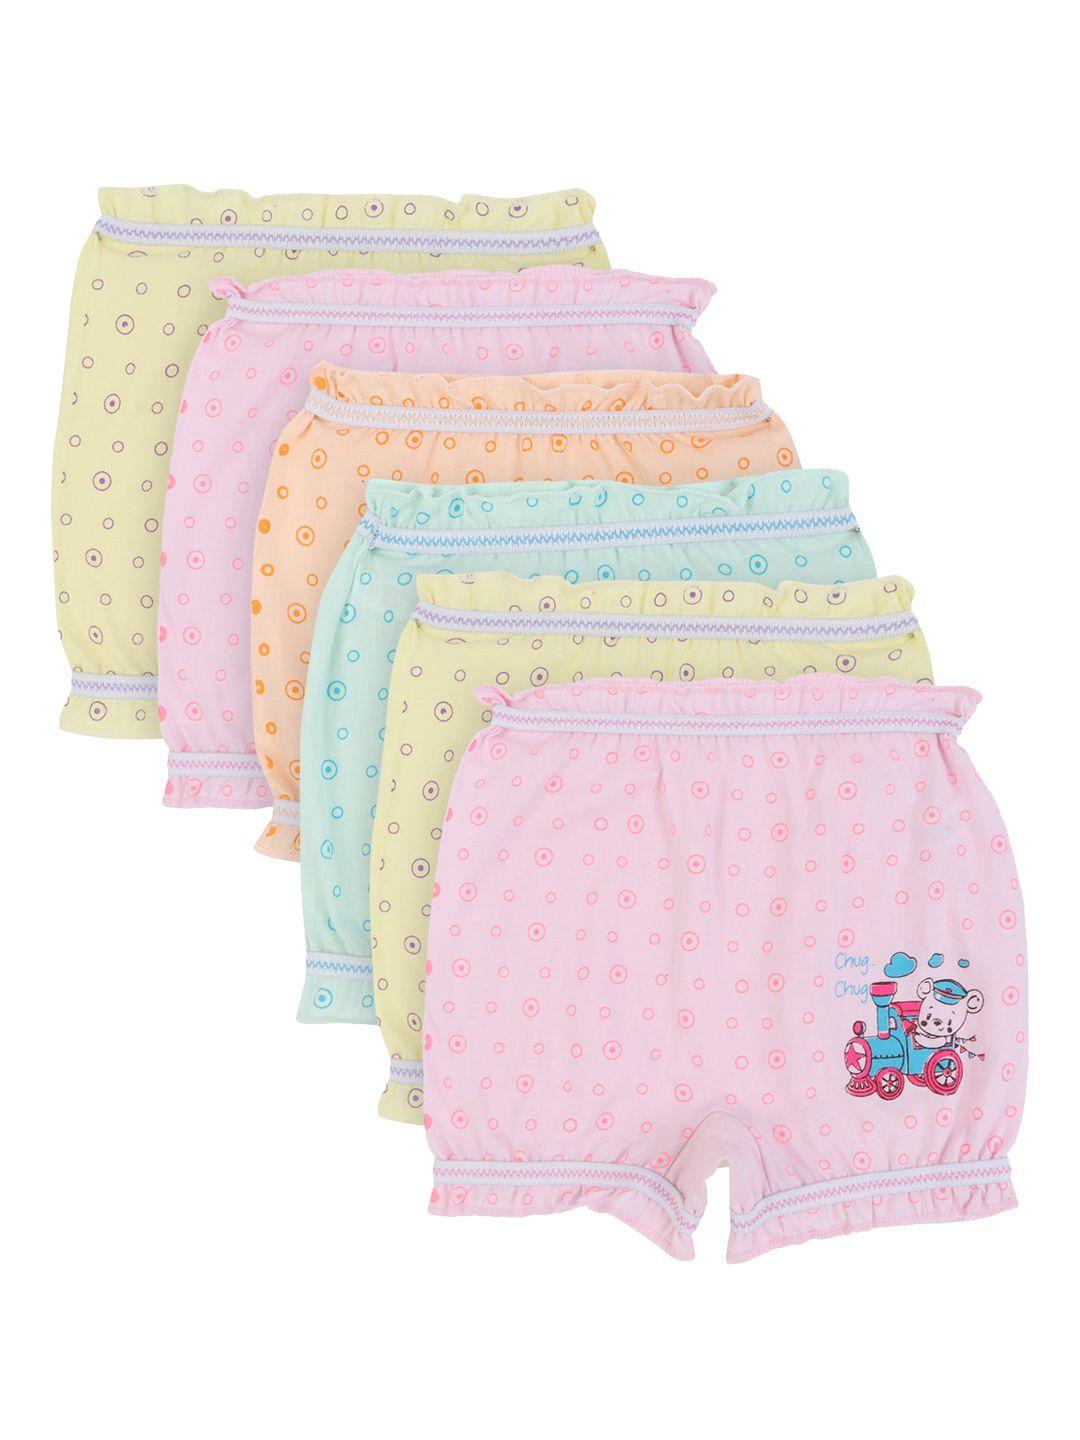 dyca kids pack of 6 assorted cotton mid-rise basic briefs